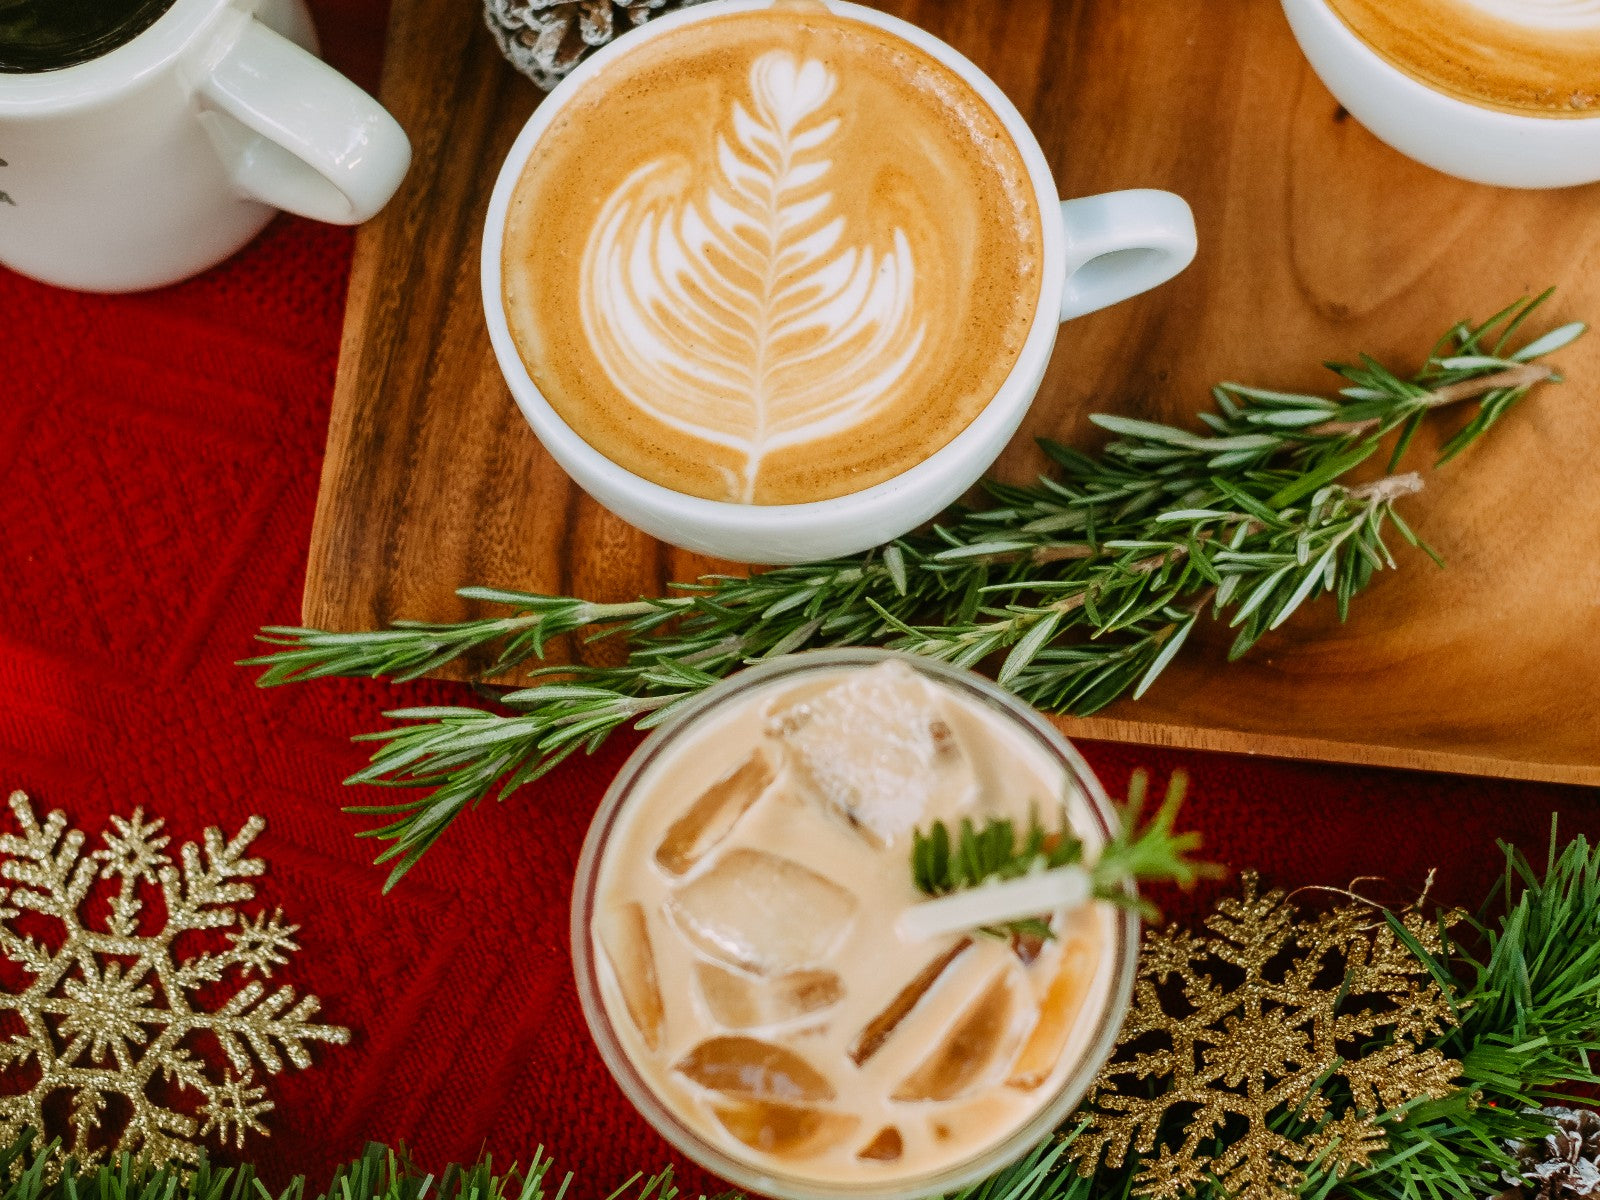 Chocolate Latte - The Hint of Rosemary